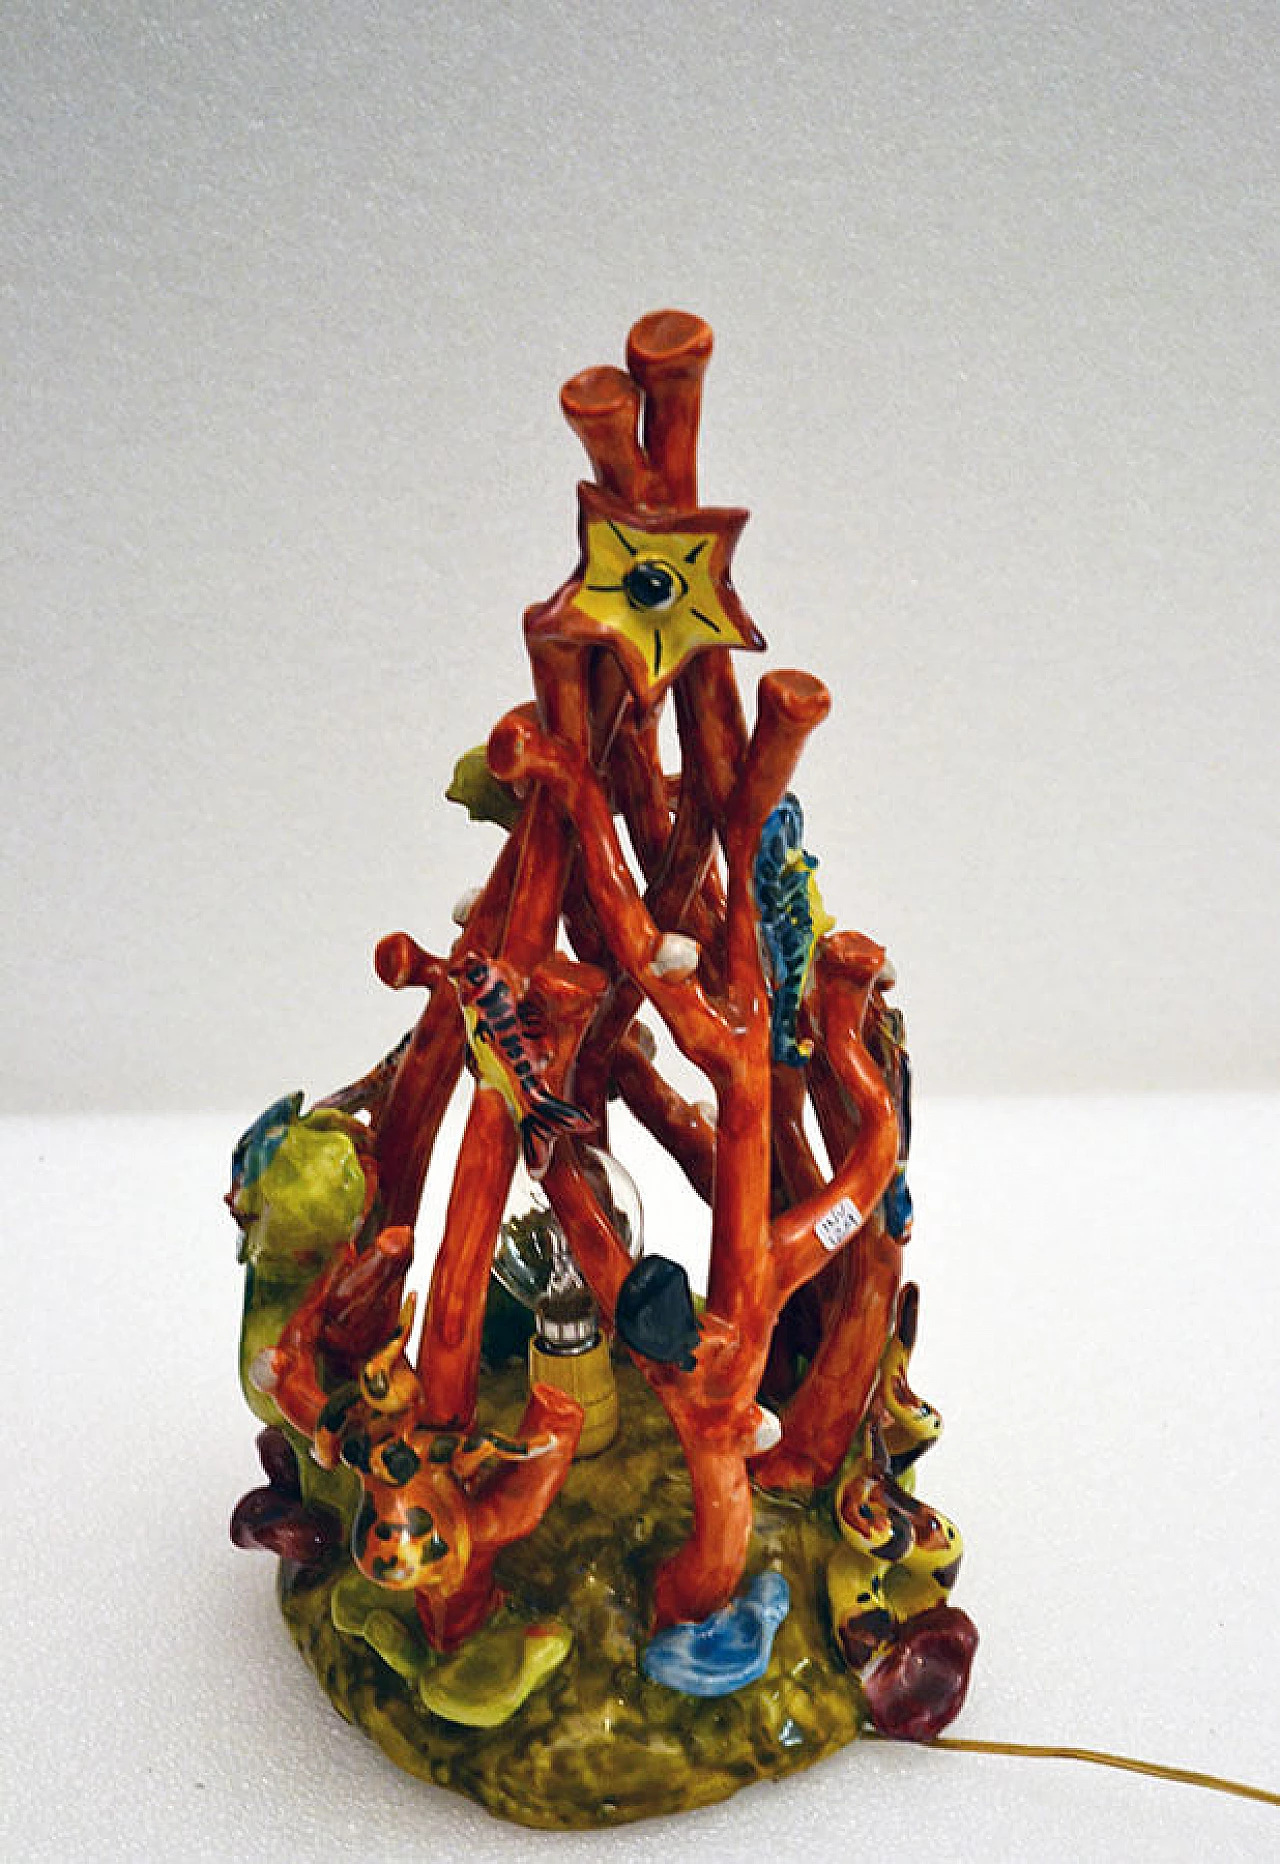 Vietri ceramic sculpture/lamp depicting coral and fishes, Italy, 60s 1063730